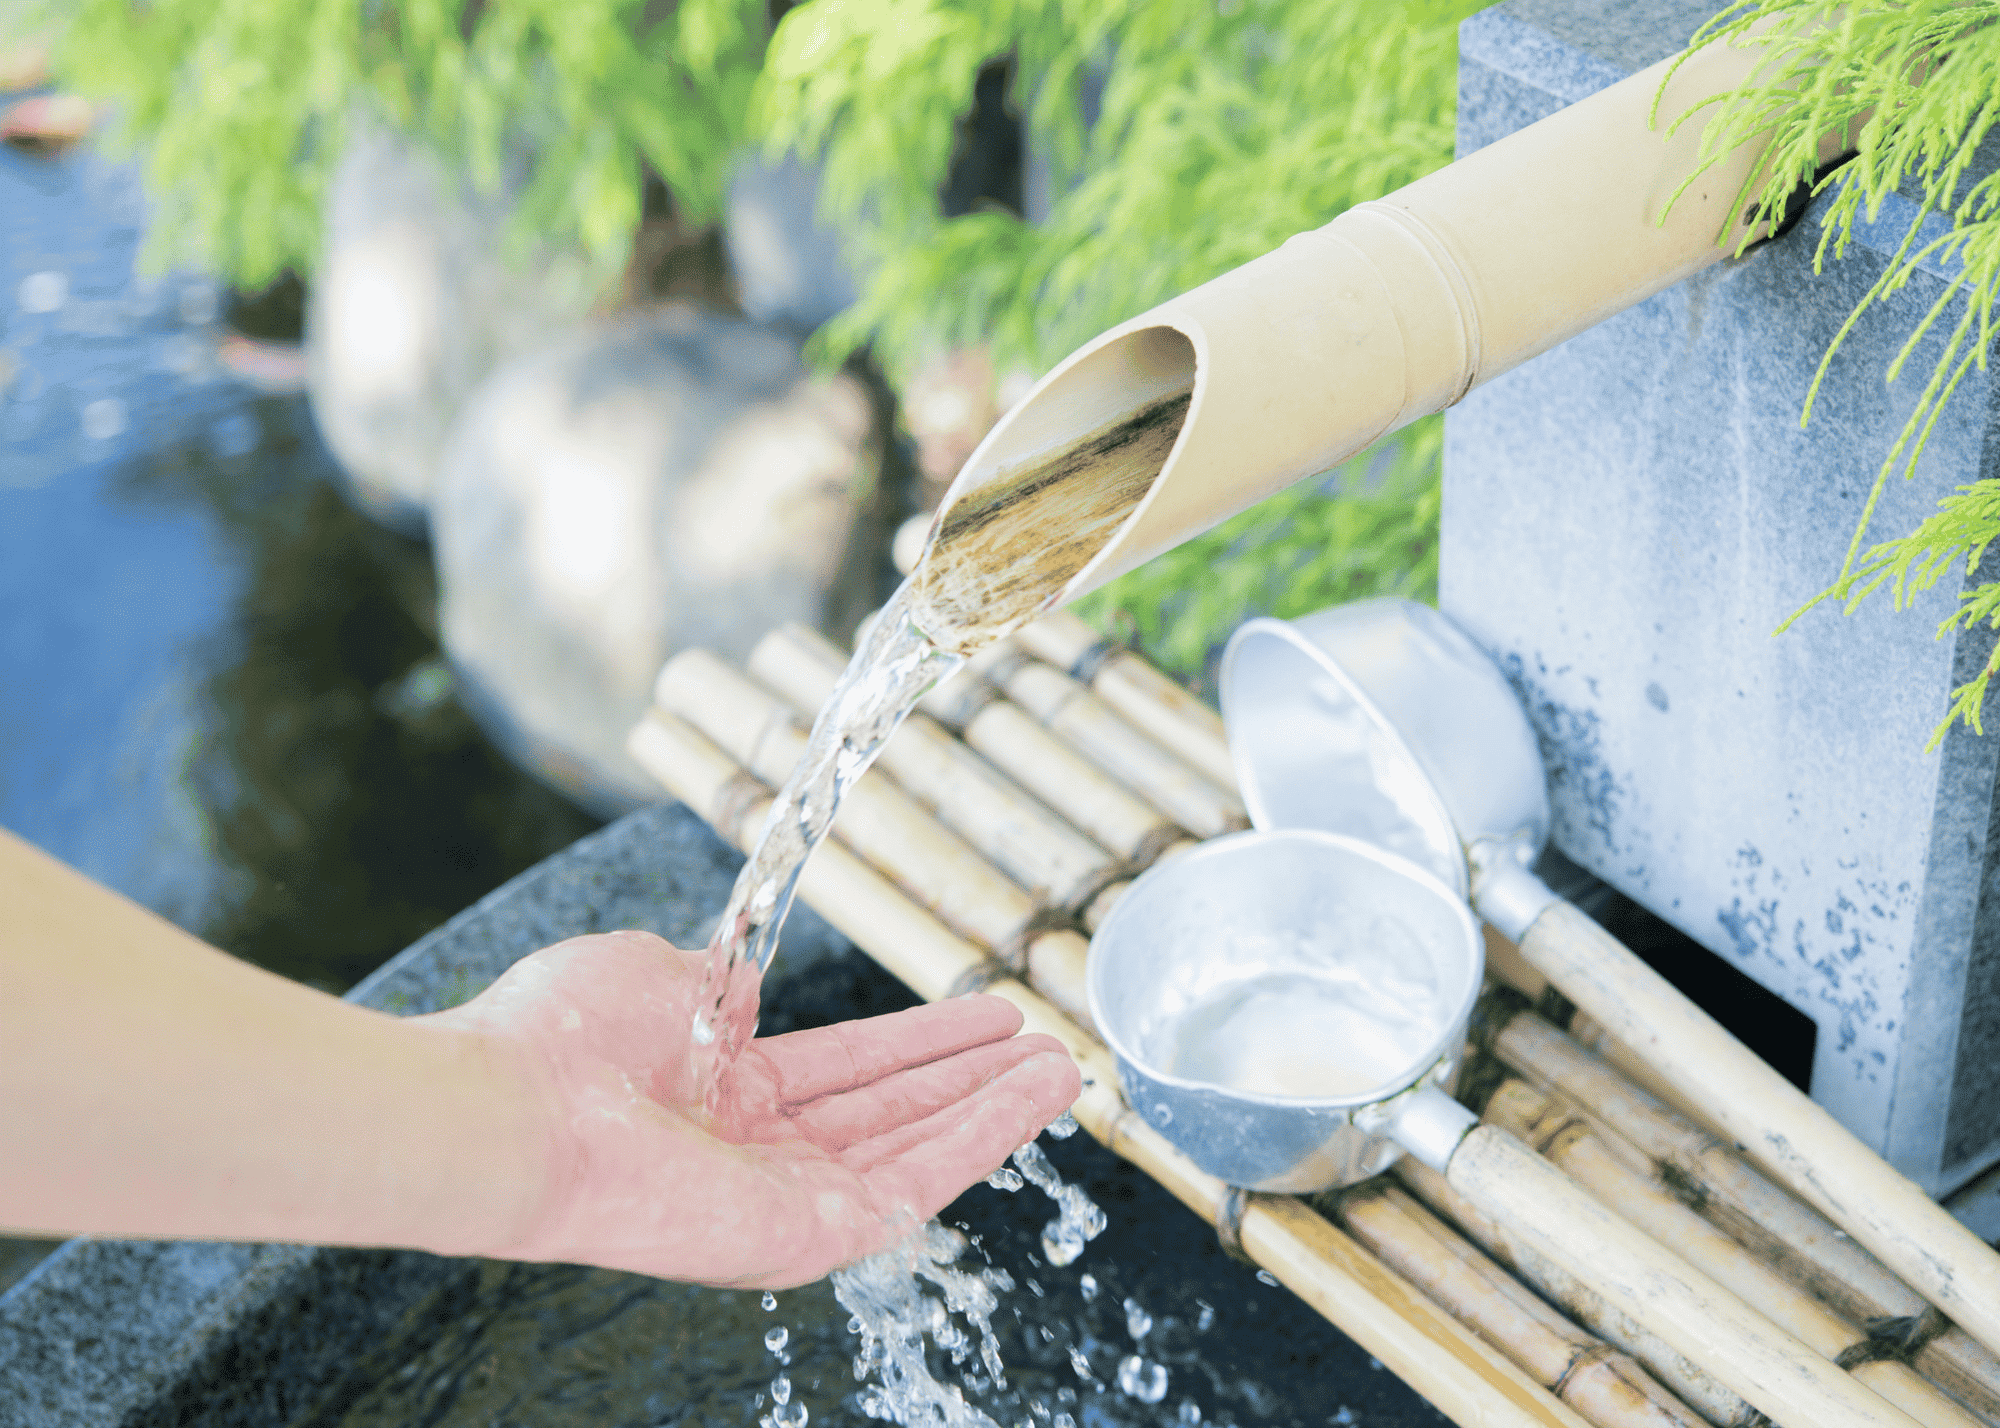 Water Storage Essentials: What To Do Before the Tap Runs Dry - SWAT  Survival, Weapons